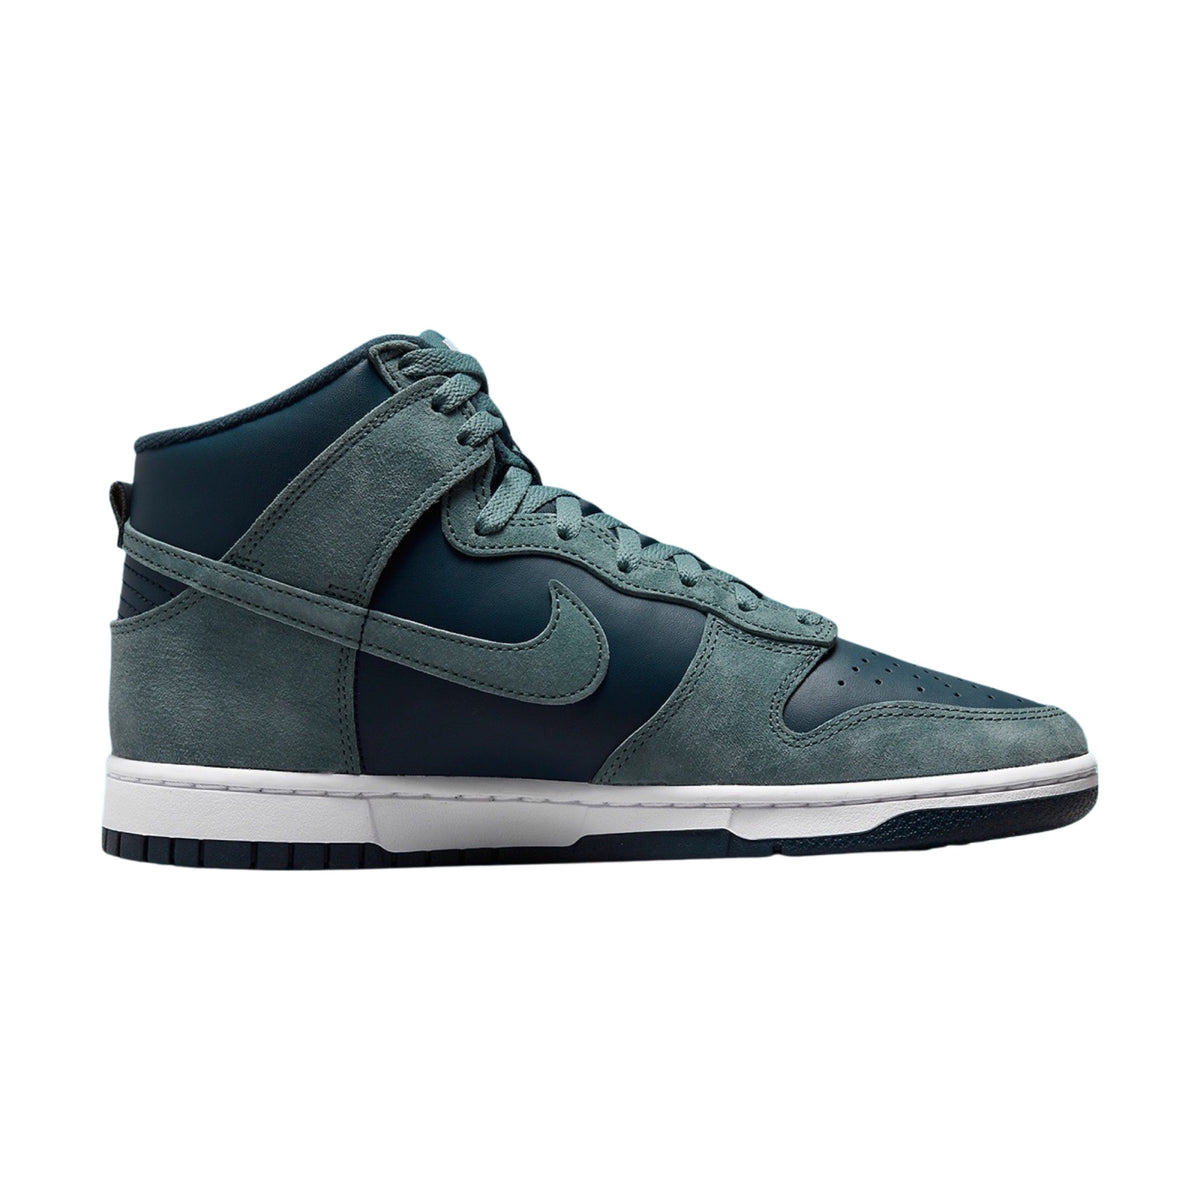 NIKE DUNK HIGH TEAL SUEDE